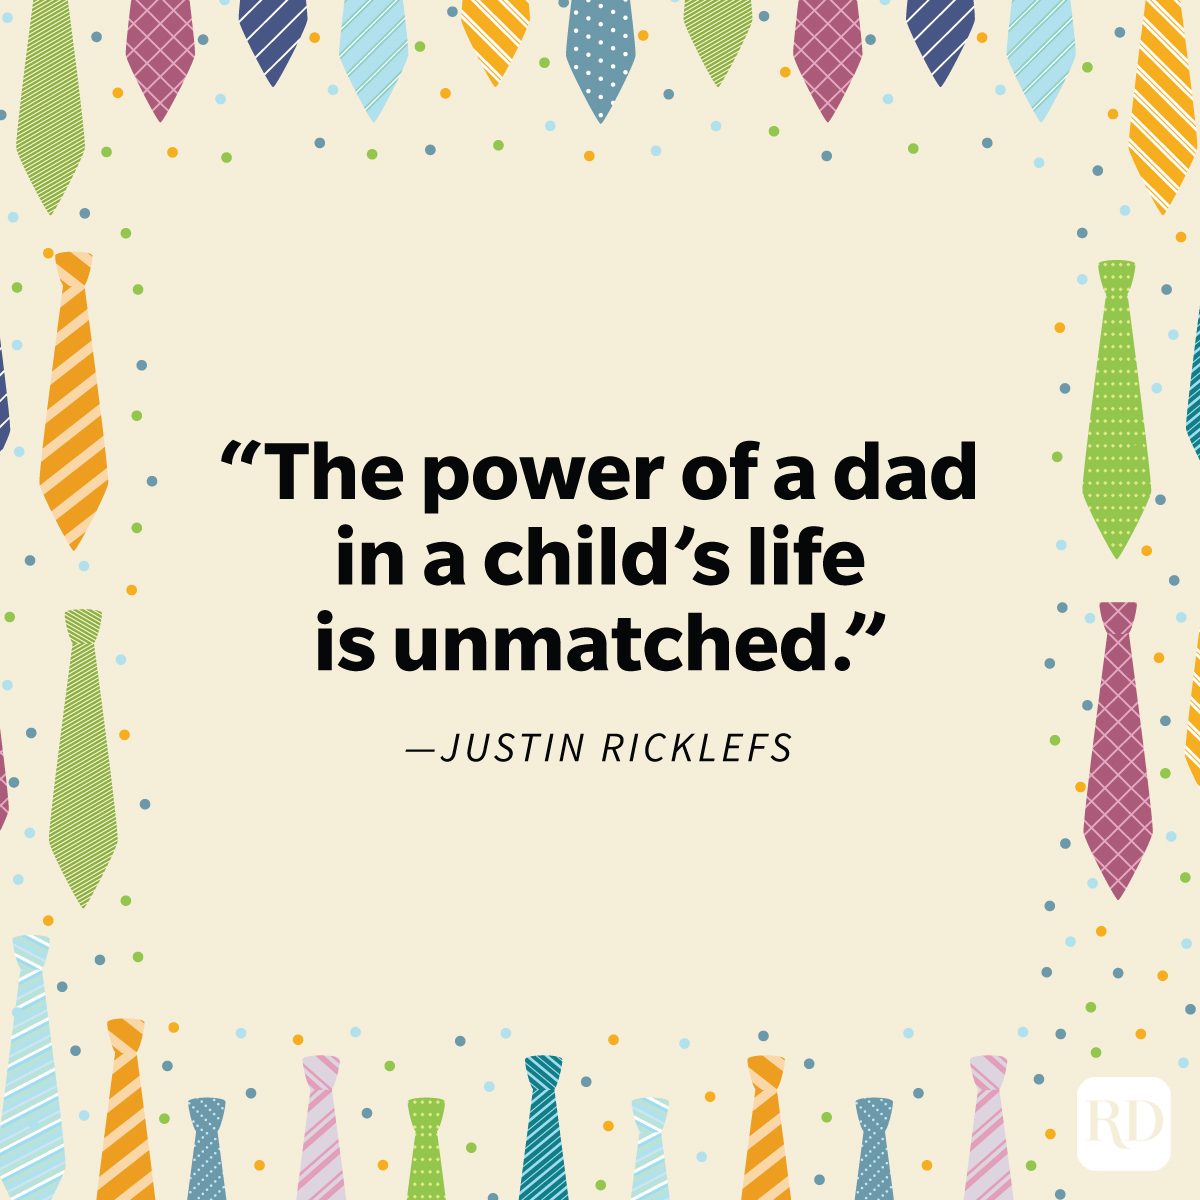 Heartfelt Father's Day Quotes That Celebrate The No 1 Guy In Your Life with ties in different patterns framing it